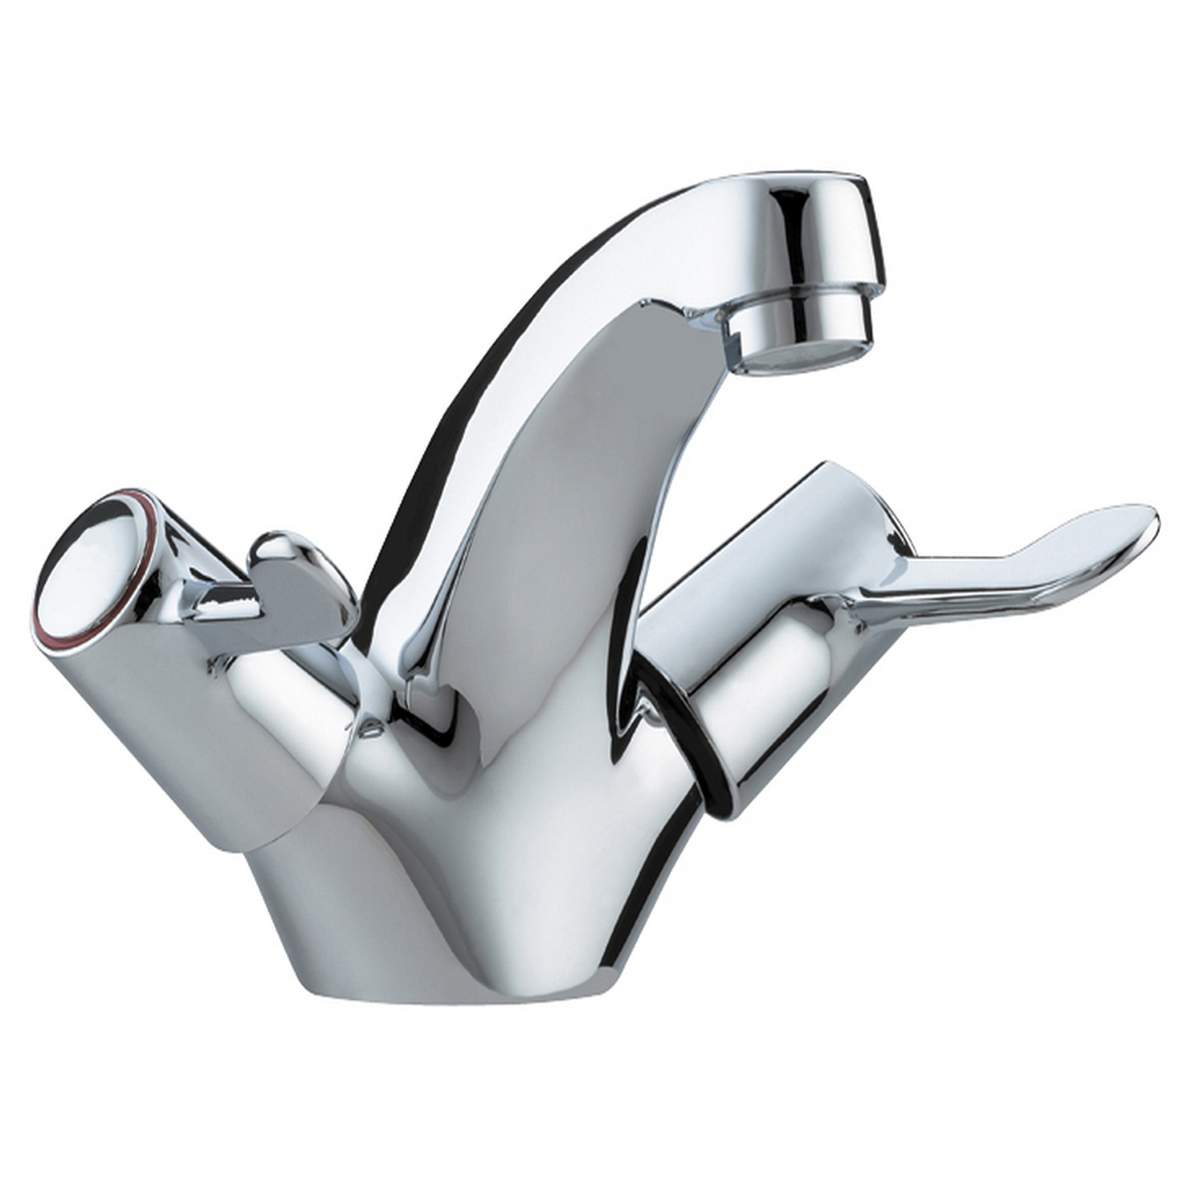 JTP Astra-CD Basin Mixer with Pop Up Waste